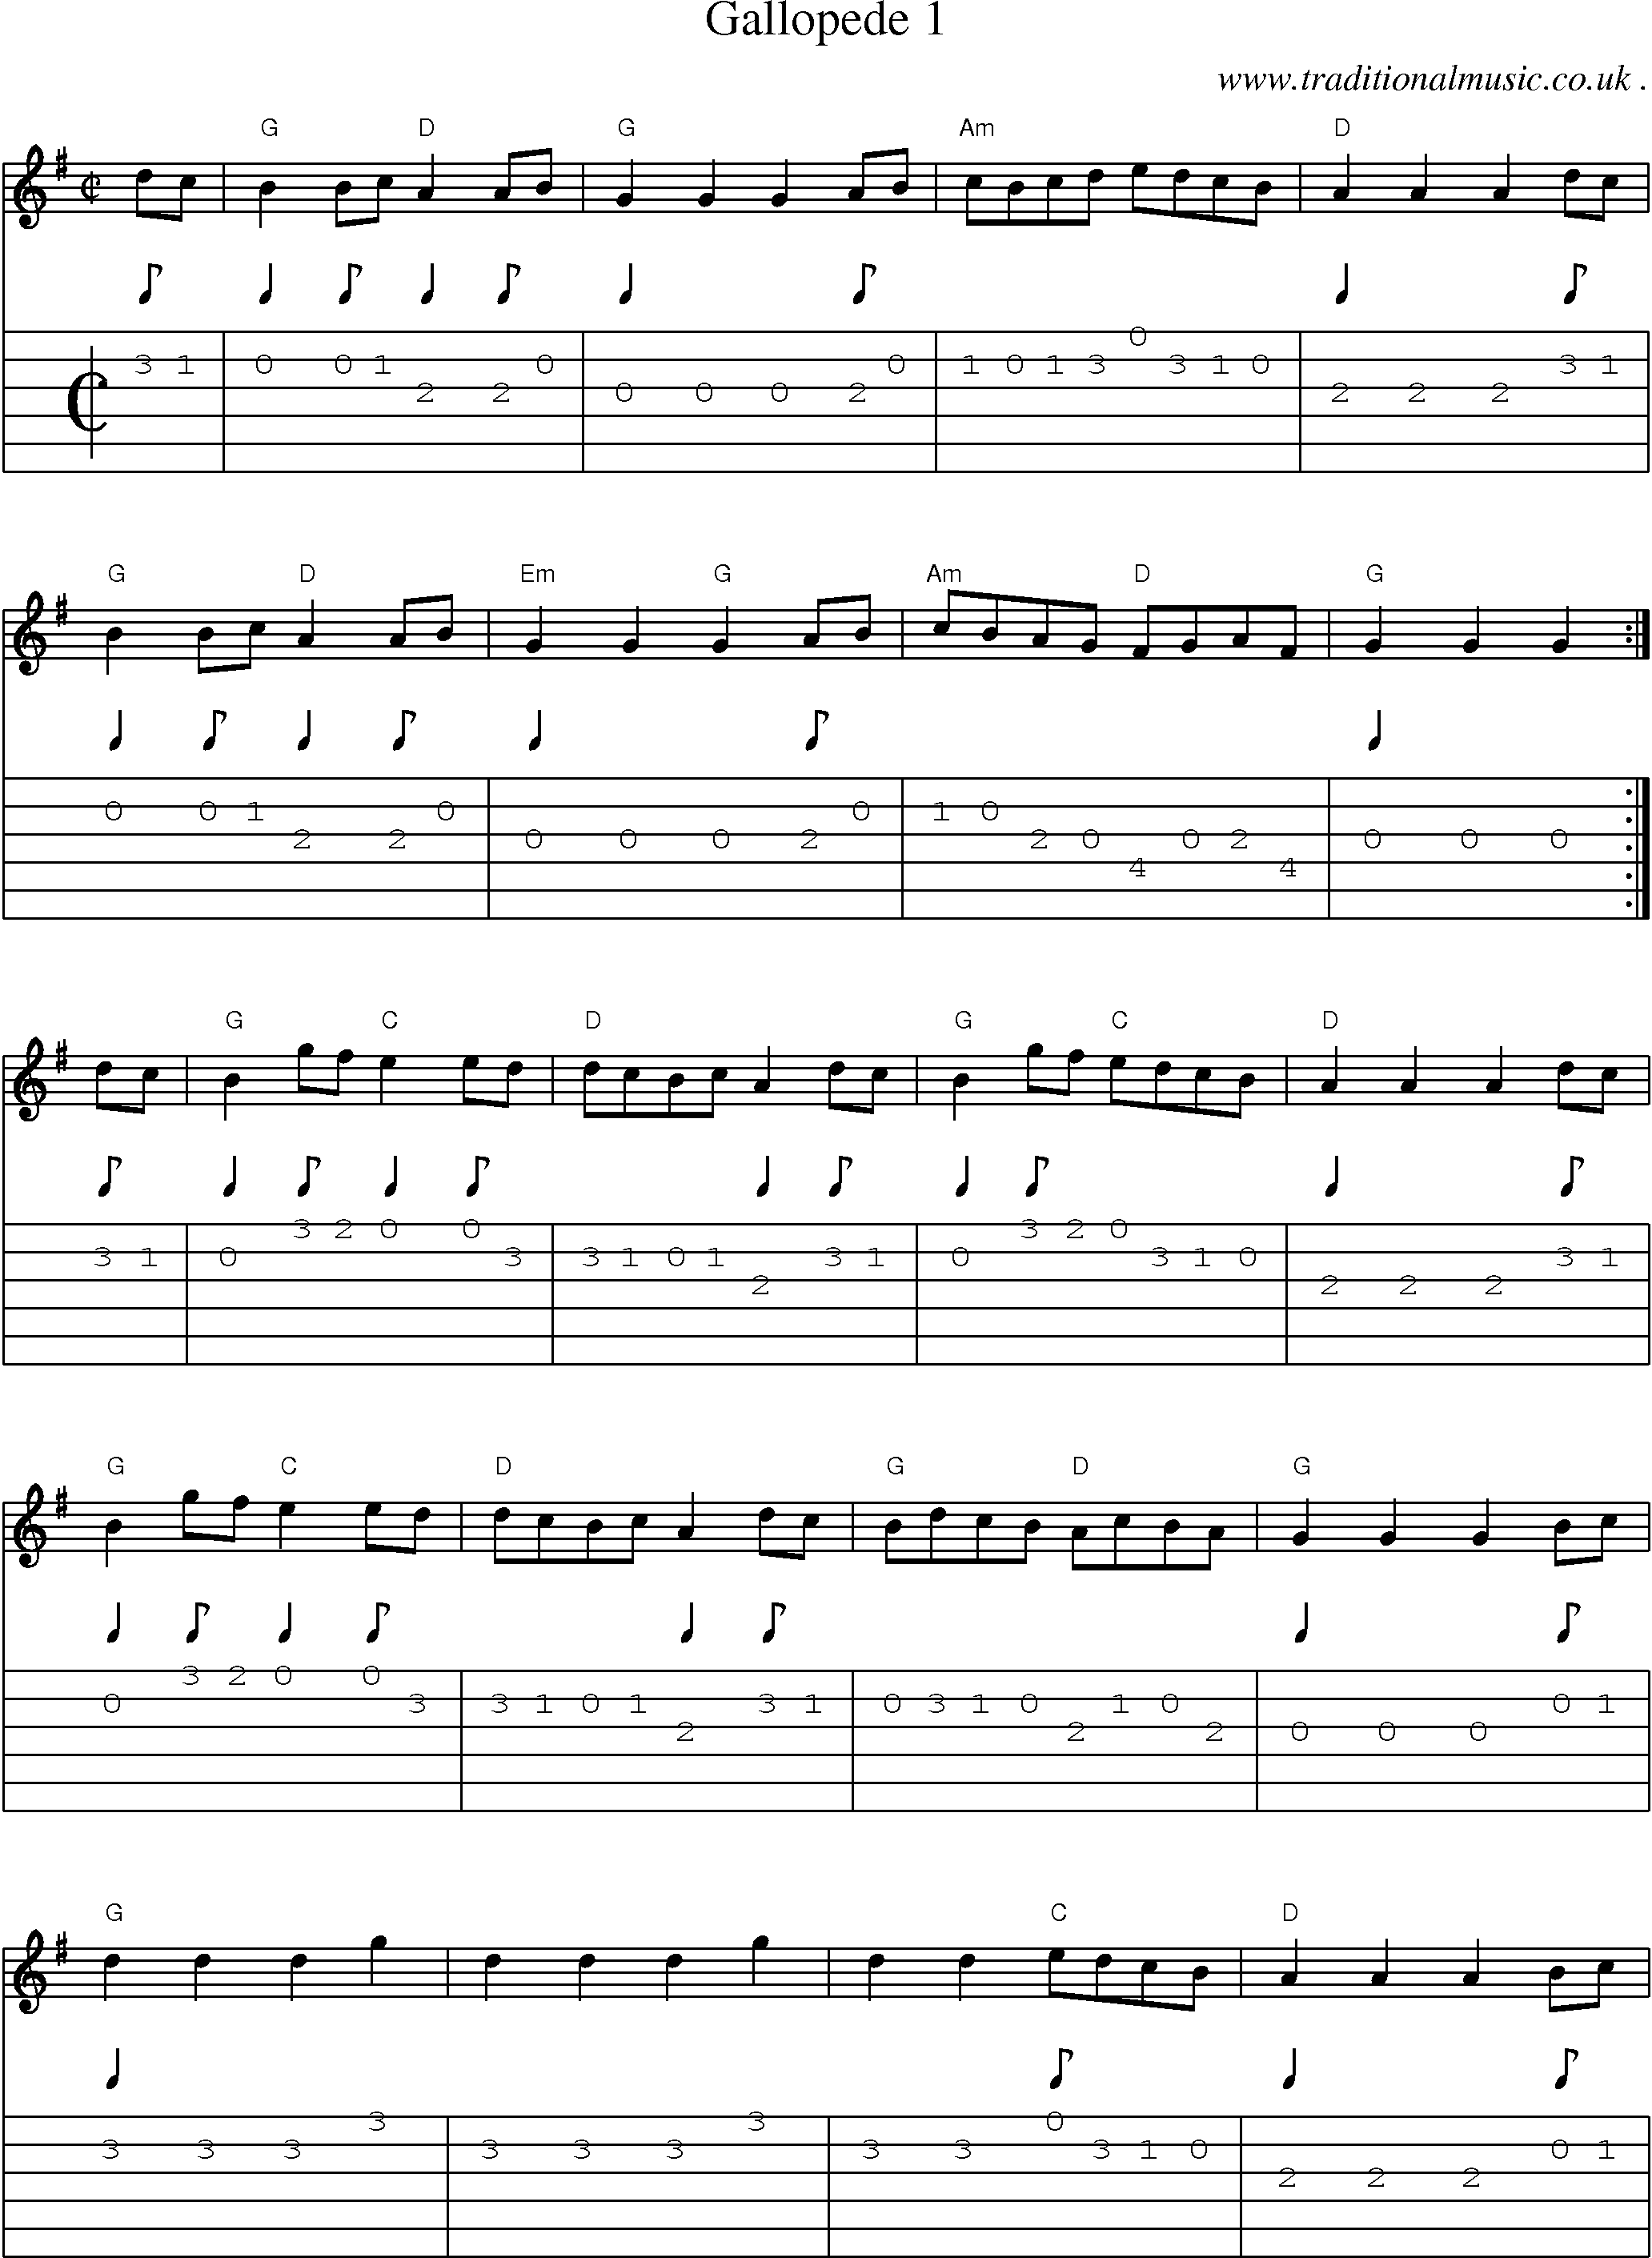 Music Score and Guitar Tabs for Gallopede 1